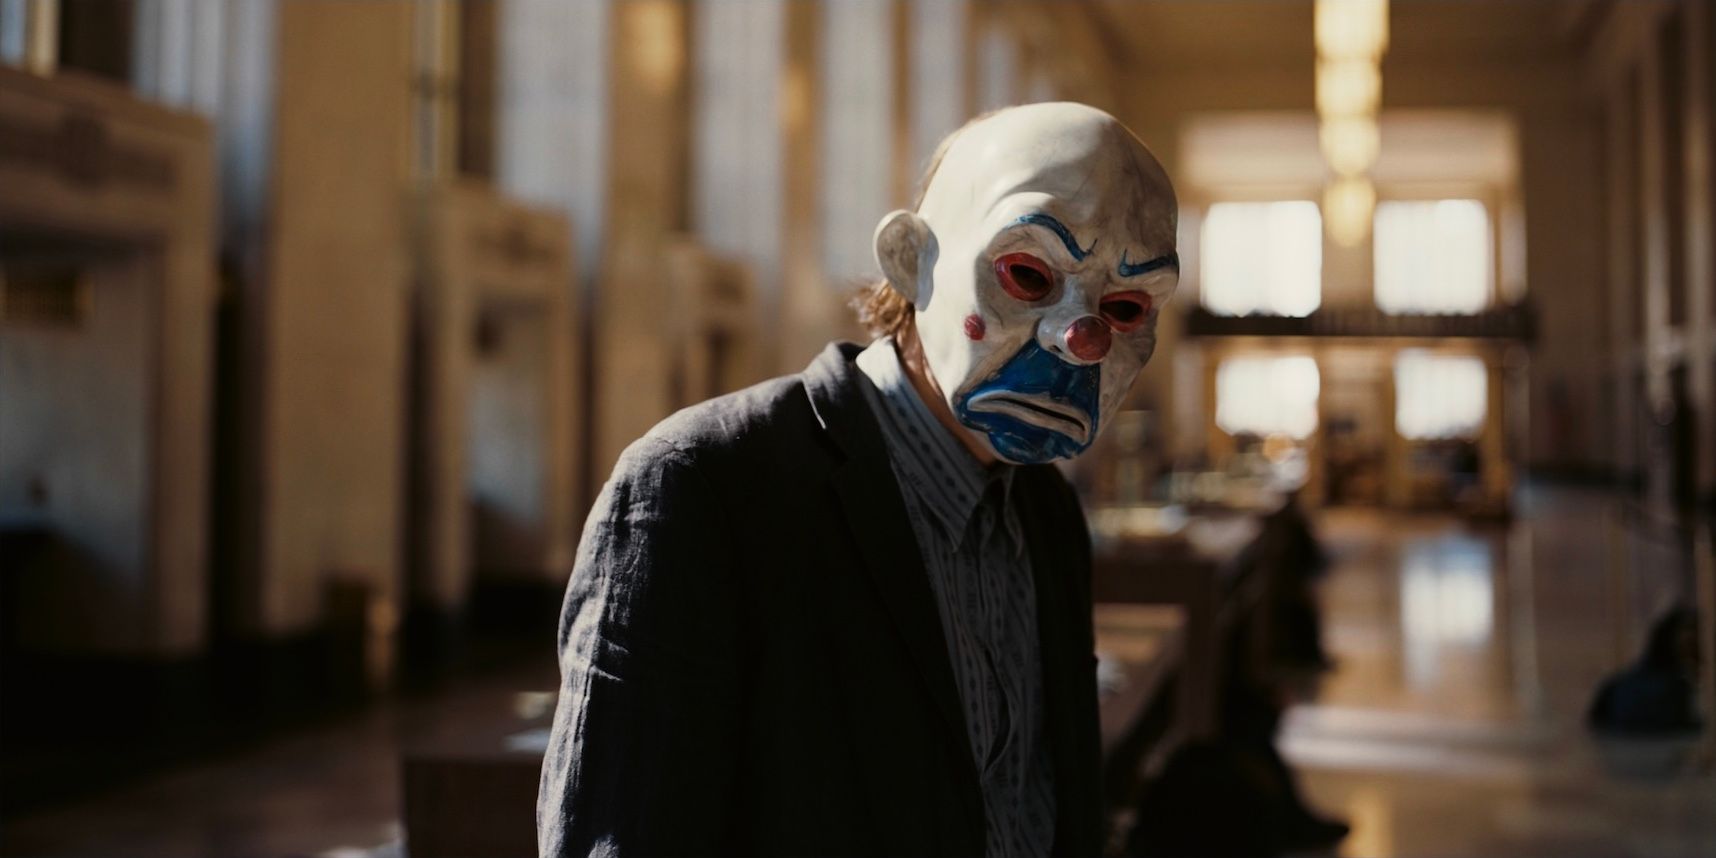 The Joker robs a bank in The Dark Knight (2008).